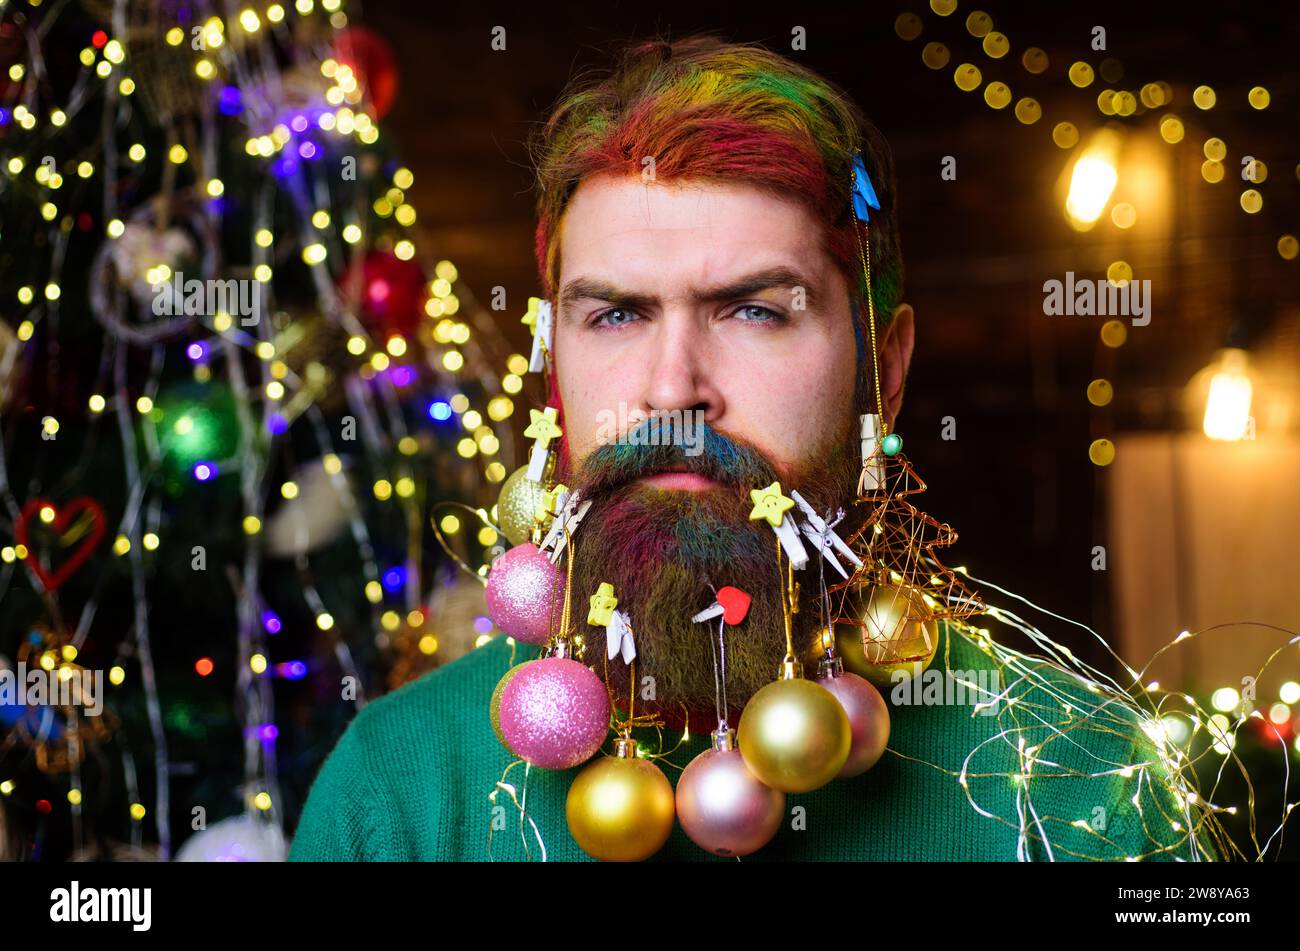 Merry Christmas and Happy New Year. Christmas barbershop. Serious man with colorful dyed hair and decorated beard for New Year party. Christmas beard Stock Photo